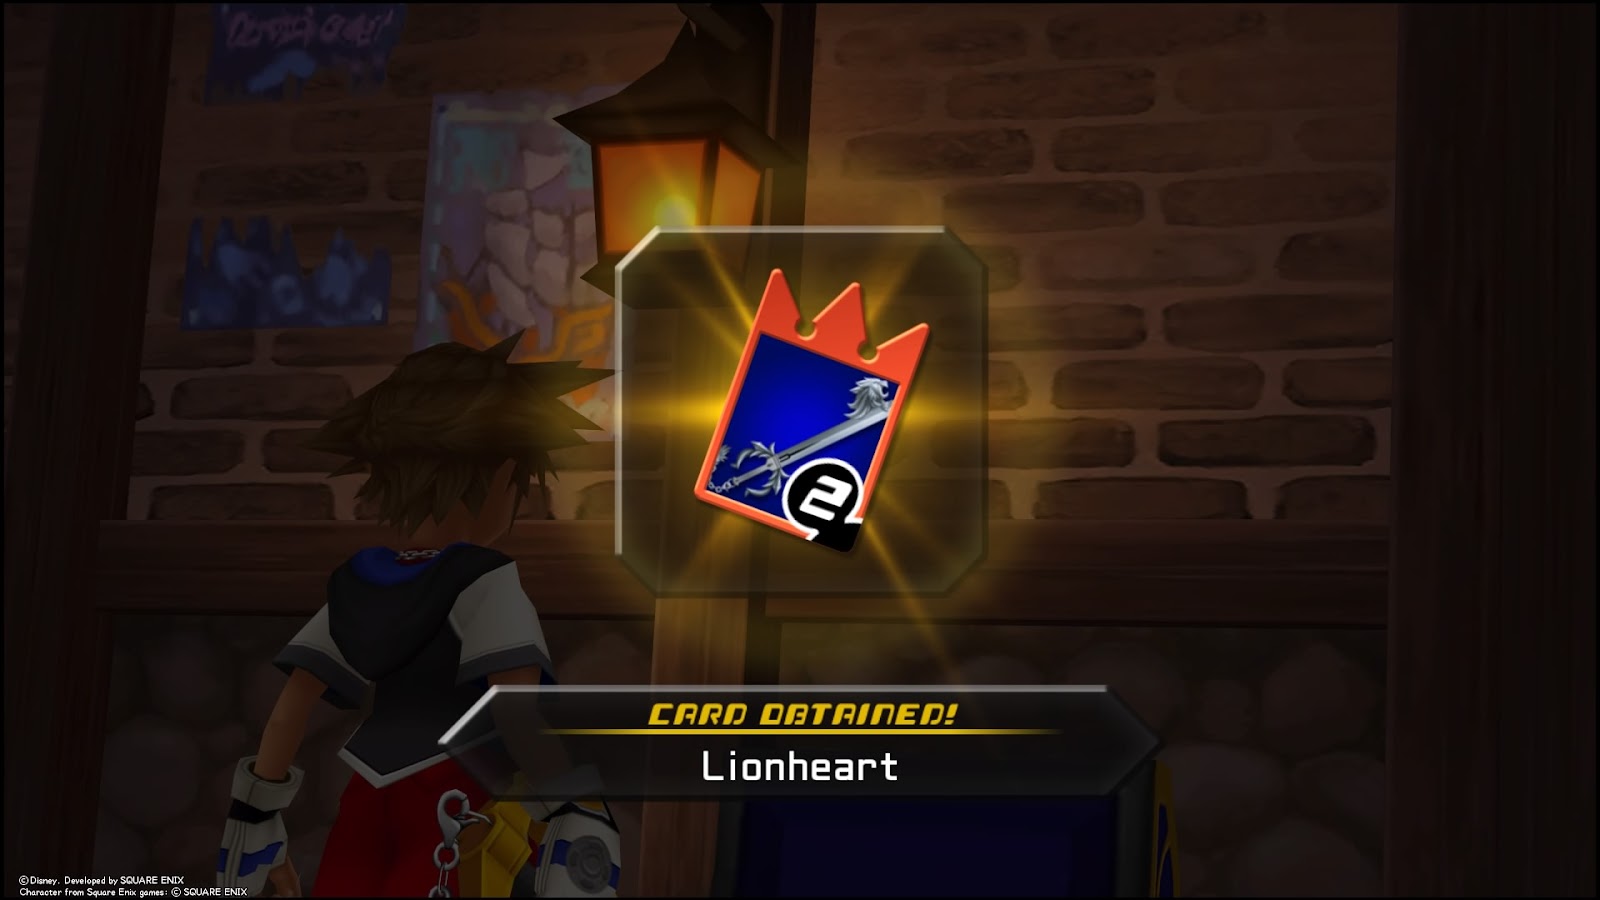 Final Fantasy 8 fans will recognize the resemblance to Leon’s necklace | Kingdom Hearts Re:Chain of Memories